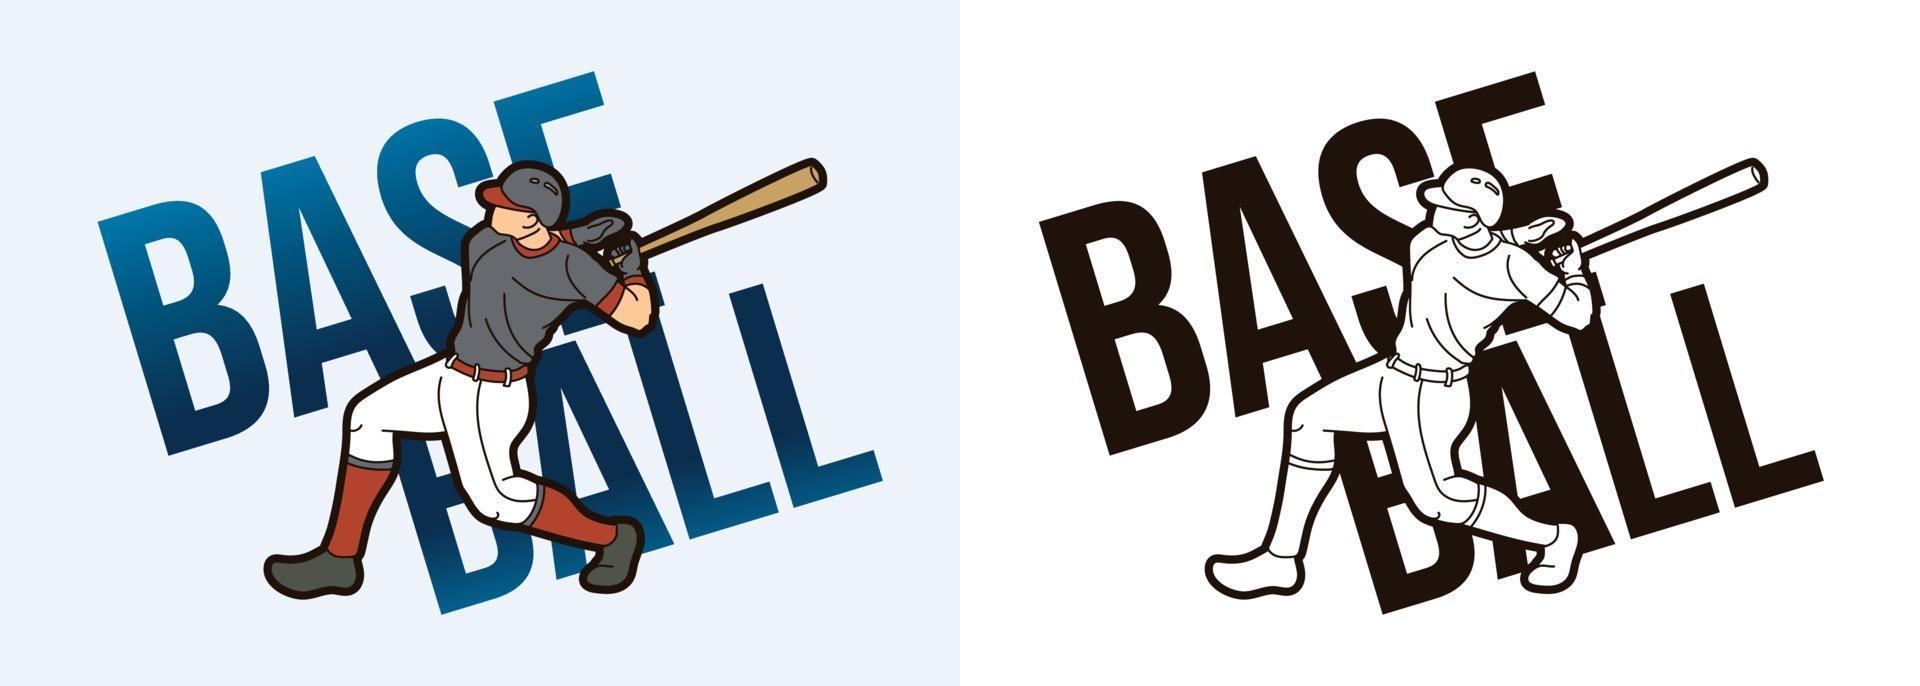 Baseball Text With Sport Players vector